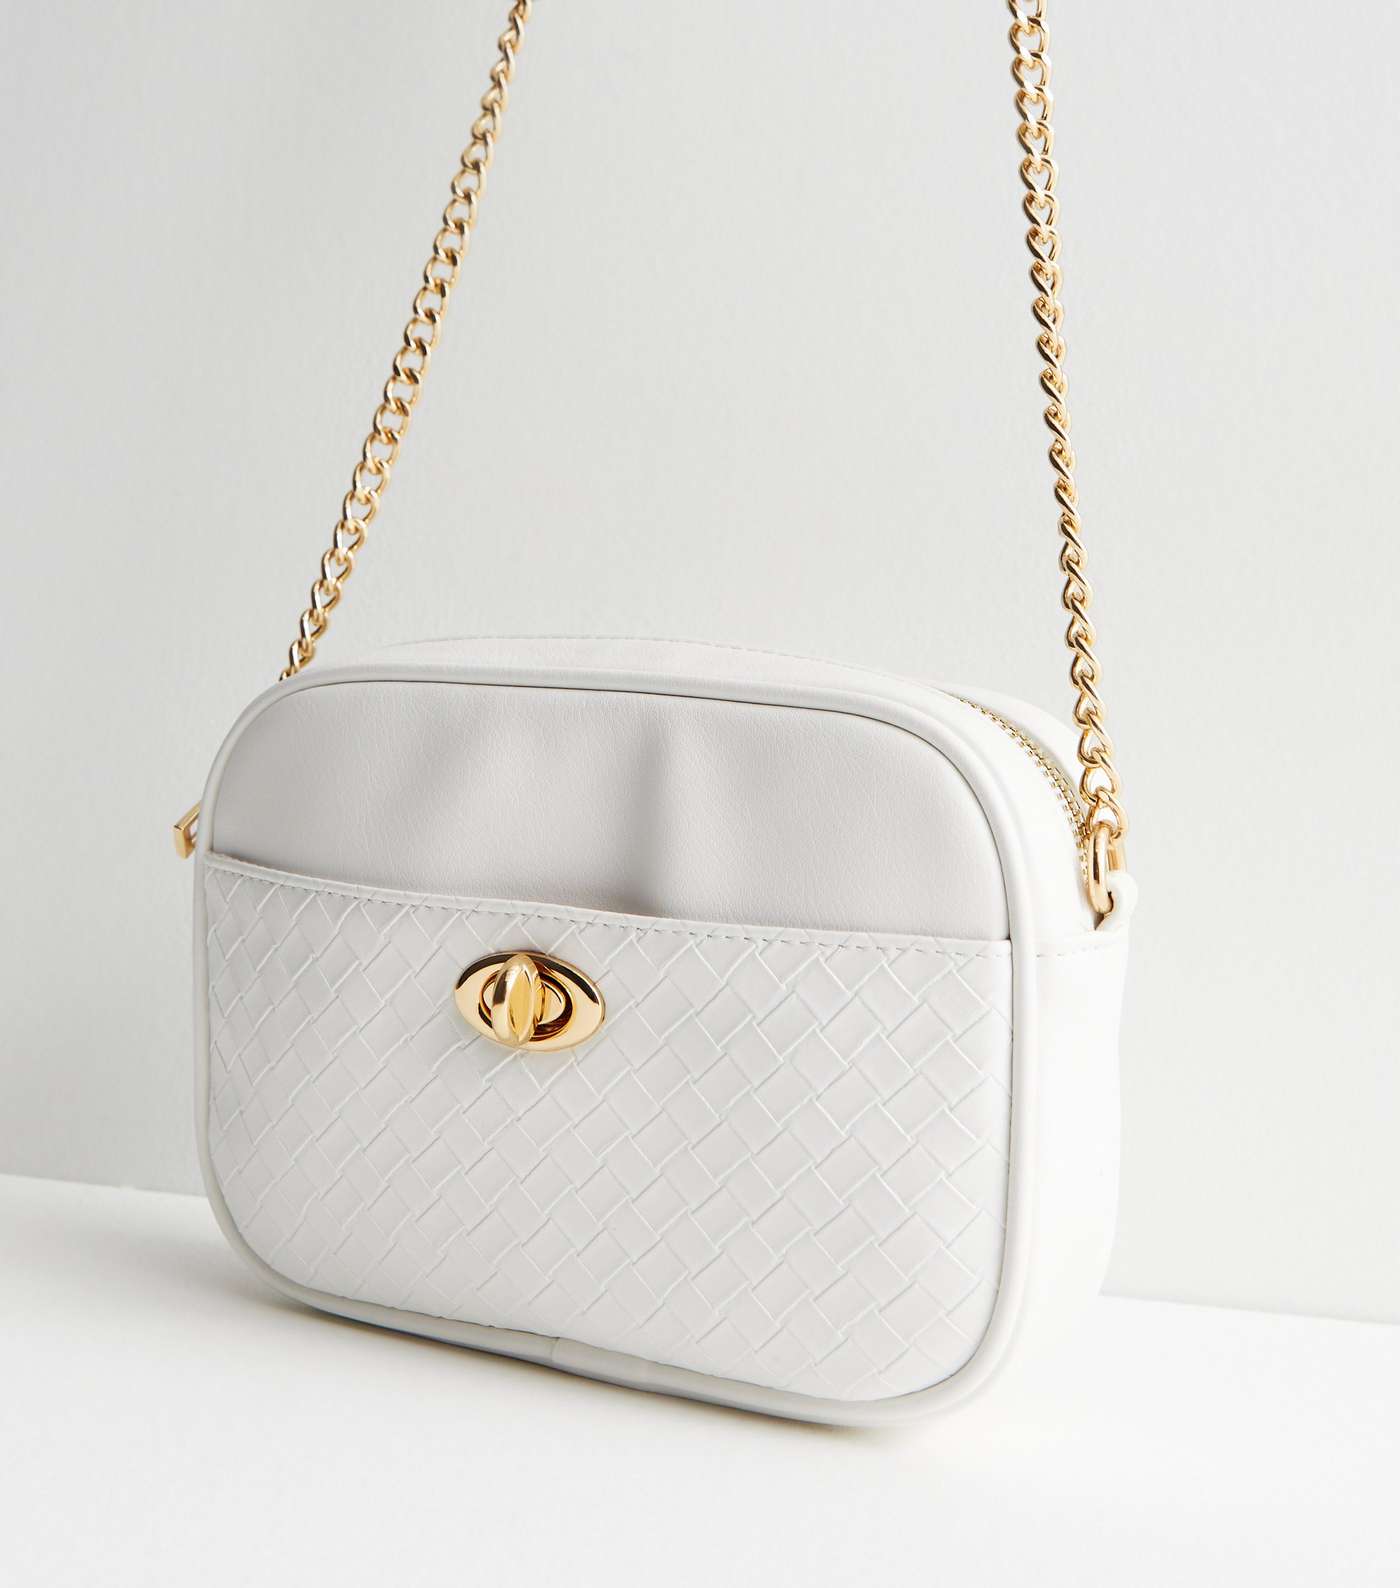 White Leather-Look Embossed Chain Cross Body Bag Image 3